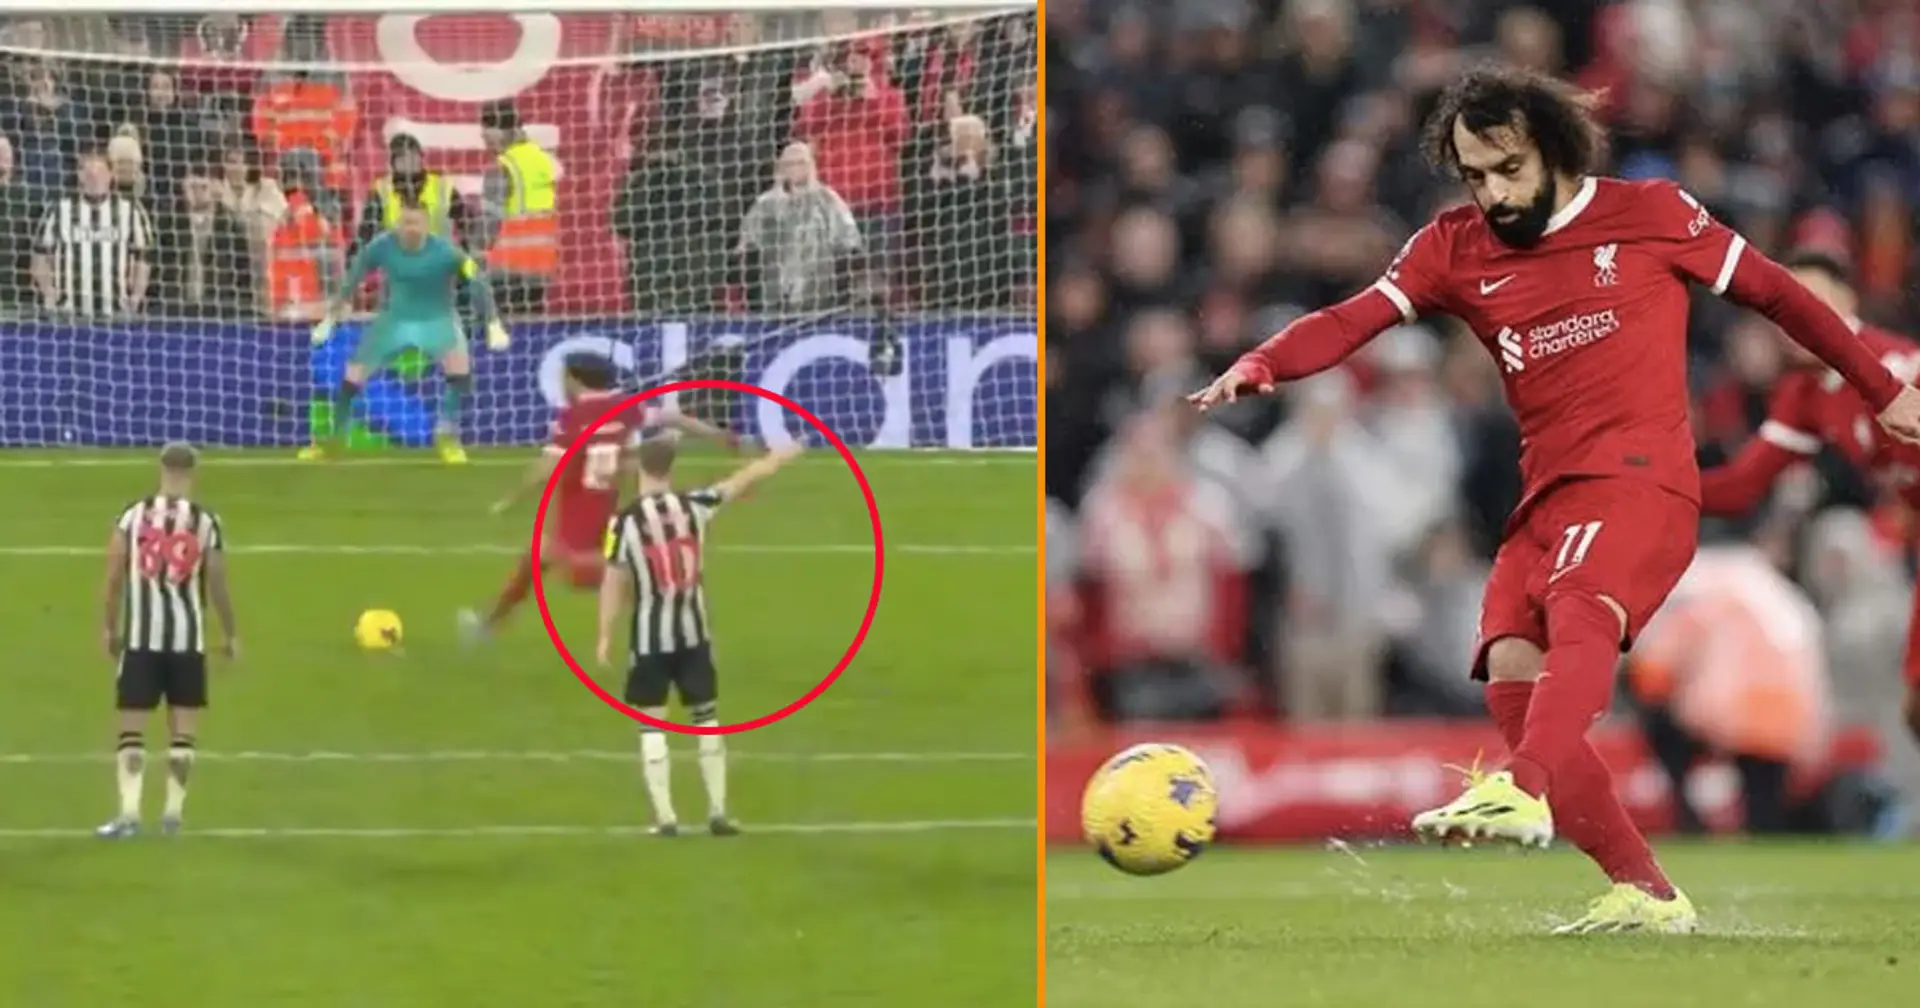 Is Anthony Gordon a Red? Newcastle man accidentally helps Salah out with penalty kick - spotted